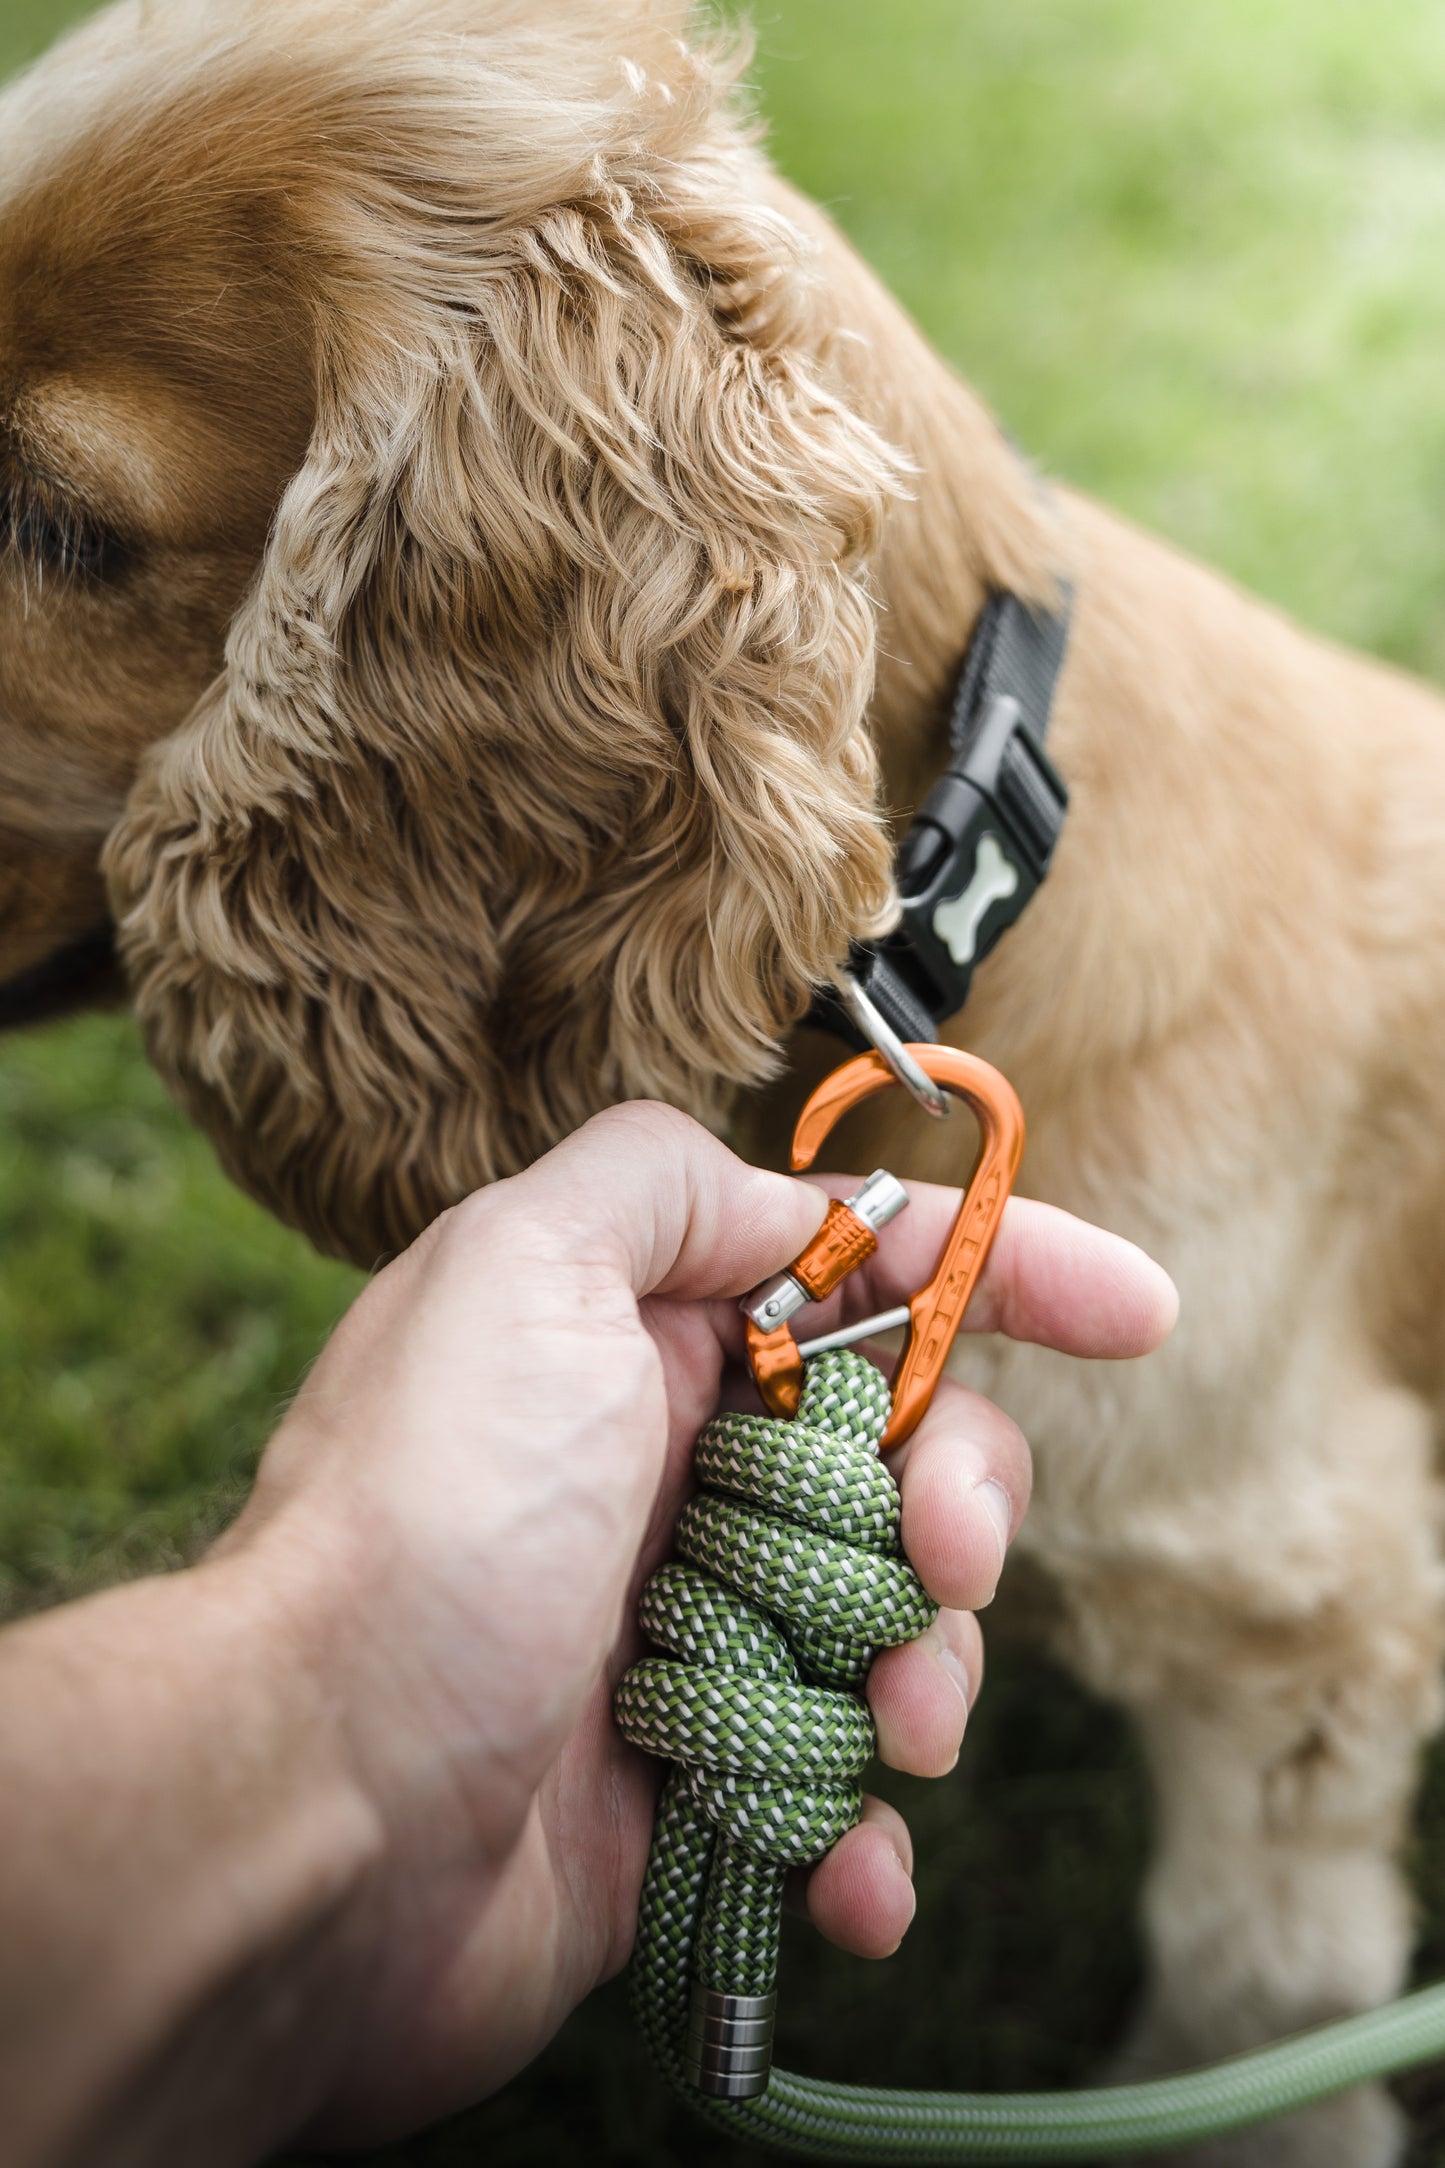 Forest Green, Petzl® Climbing Rope Dog Lead